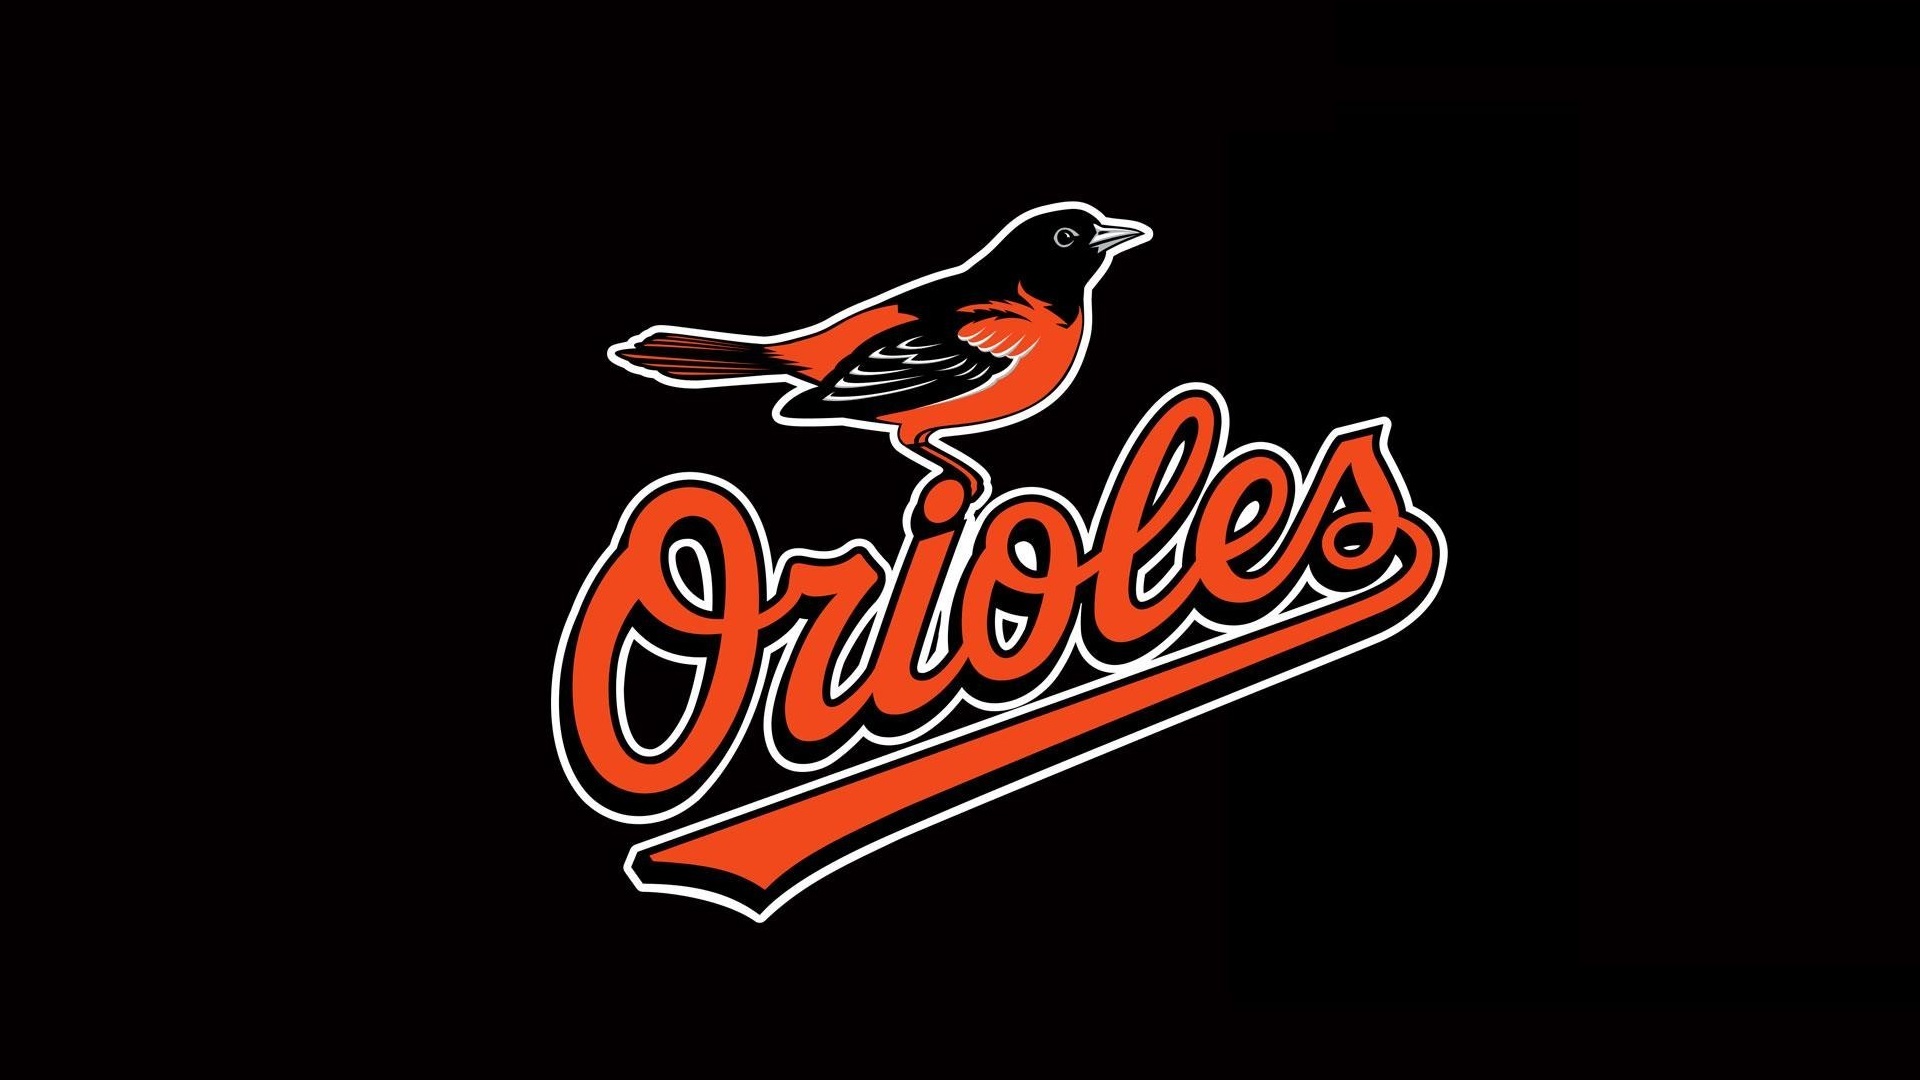 Baltimore Orioles Wallpaper with high-resolution 1920x1080 pixel. You can use this wallpaper for Mac Desktop Wallpaper, Laptop Screensavers, Android Wallpapers, Tablet or iPhone Home Screen and another mobile phone device